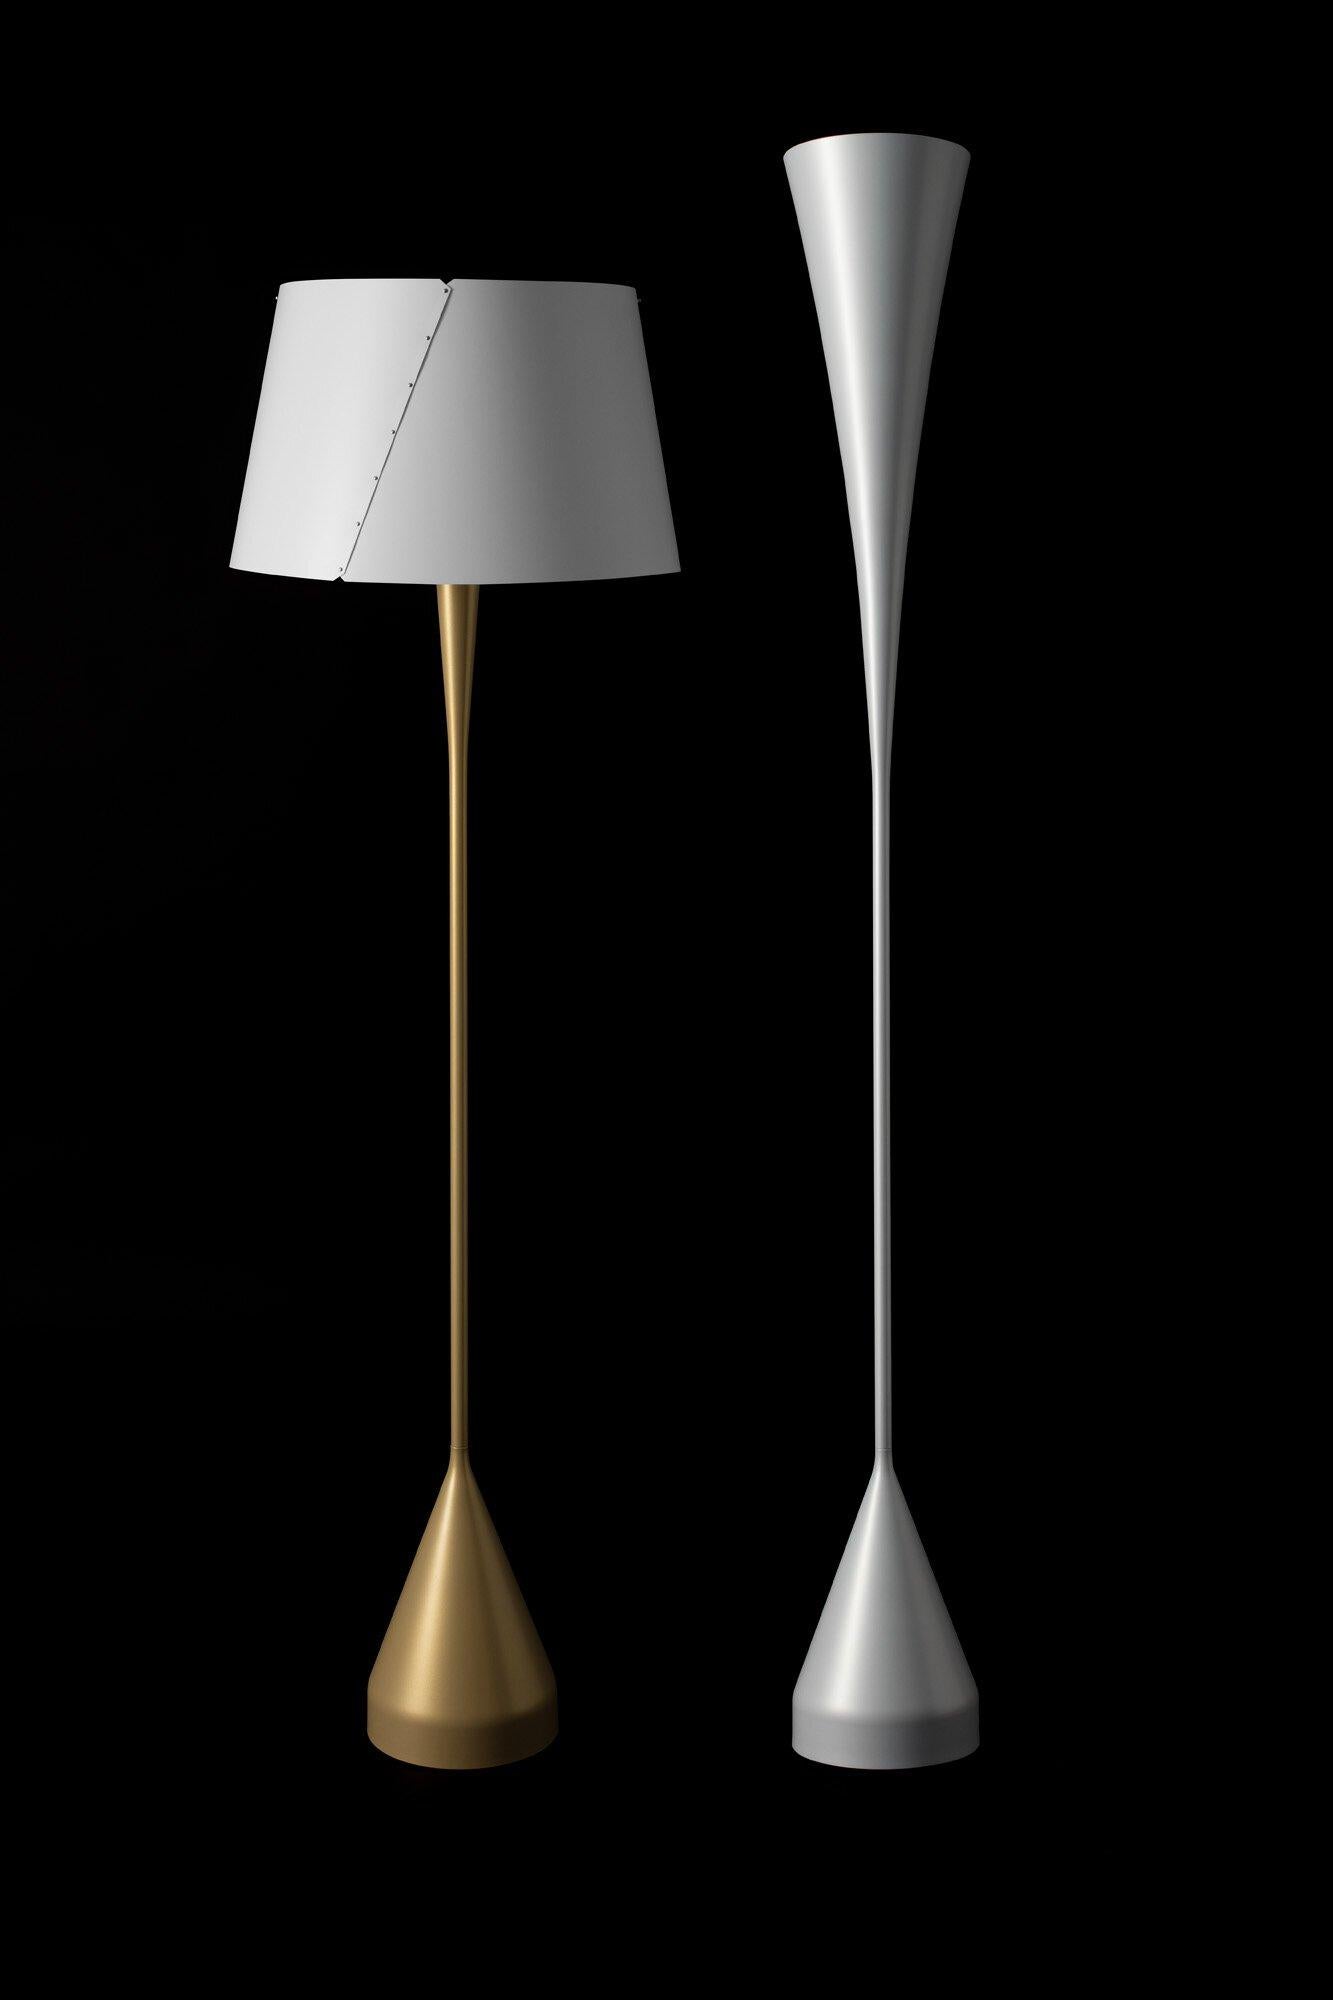 deluxa touch lamp